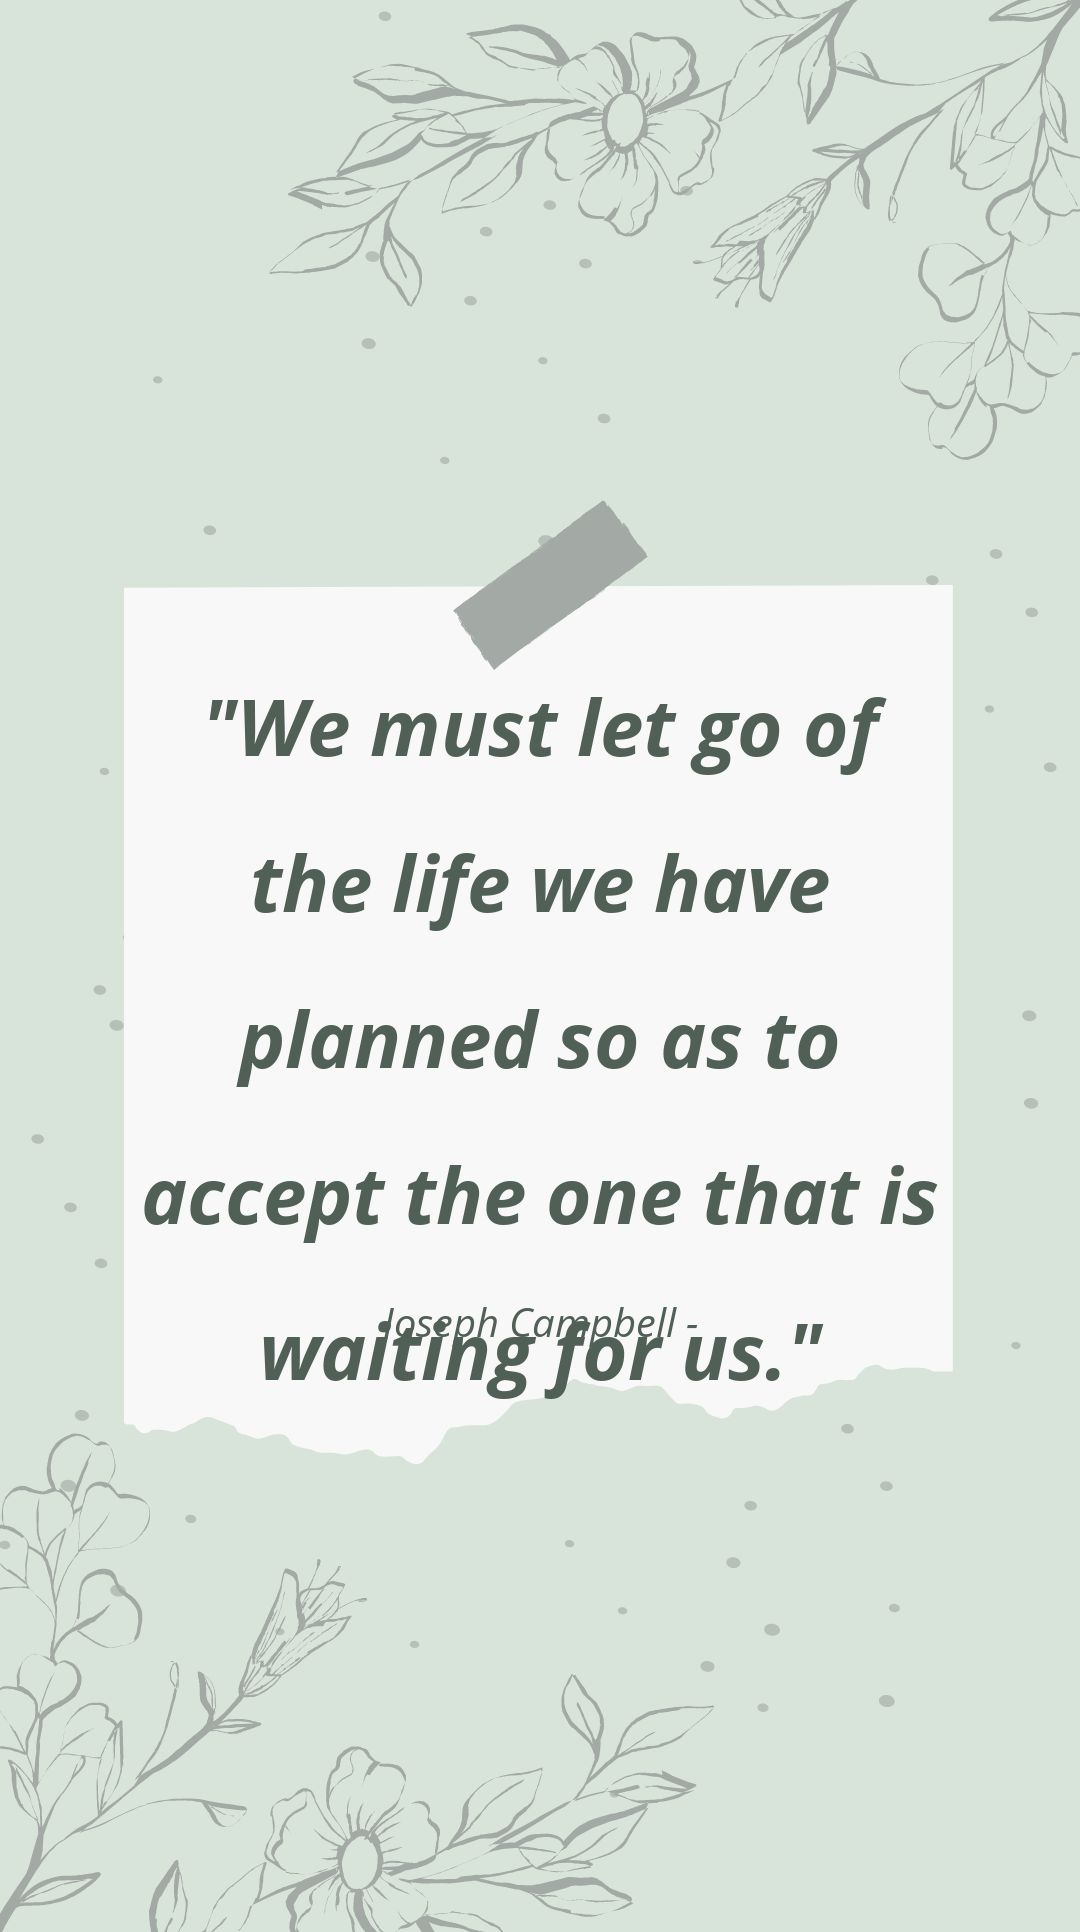 Joseph Campbell - We must let go of the life we have planned so as to accept the one that is waiting for us.